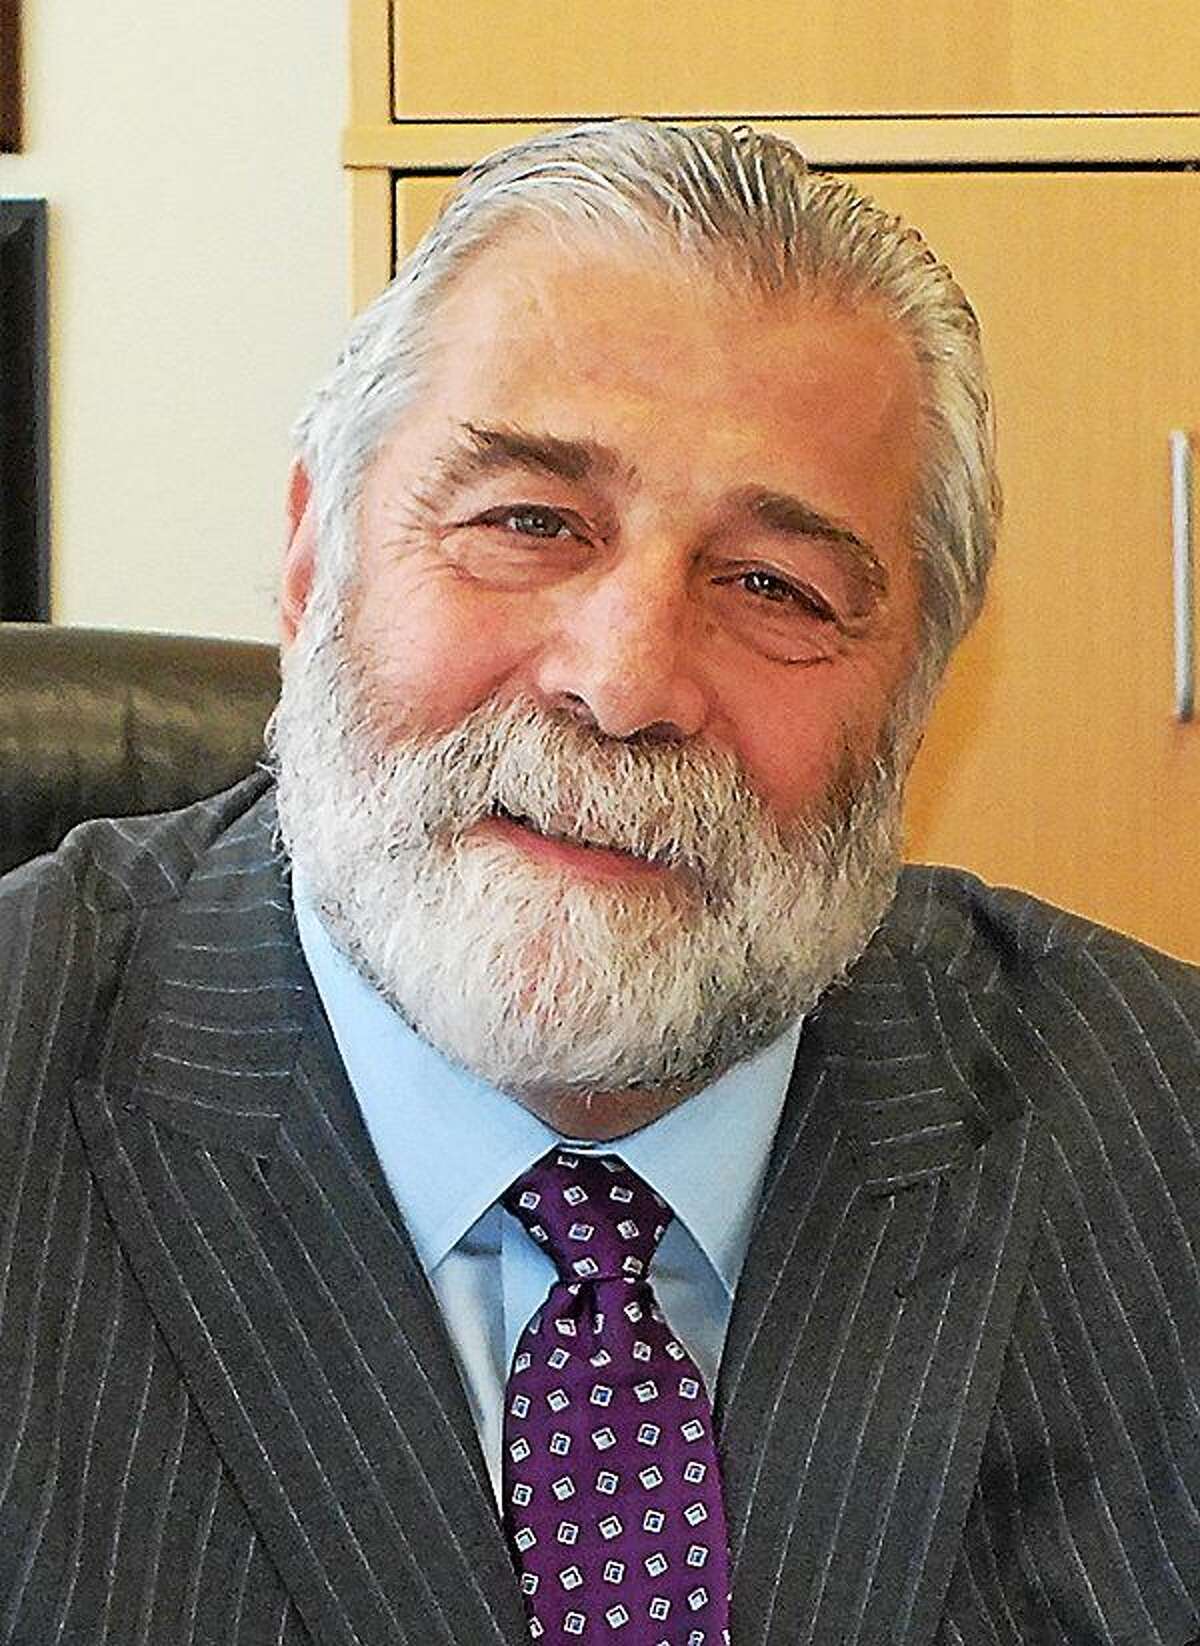 State Rep. Charles Ferraro, R-West Haven